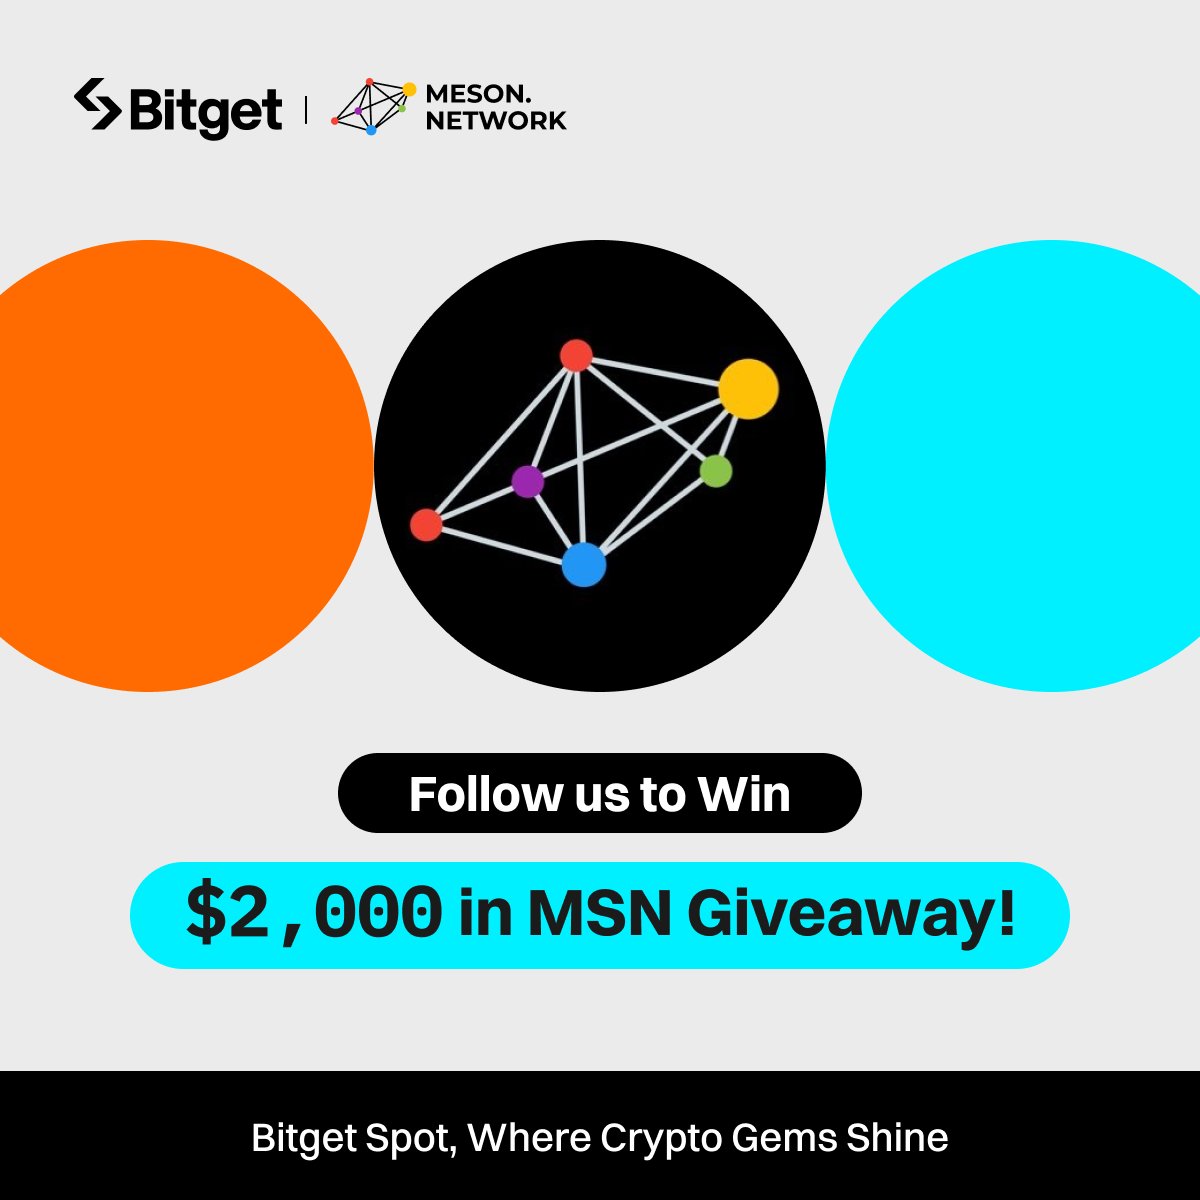 $2,000 GIVEAWAY We're giving away $2,000 worth of $MSN to celebrate its listing on #BitgetSpot! 1⃣ Follow @bitgetglobal @NetworkMeson 2⃣ Repost with #MSNlistBitget & tag your friends 3⃣ Fill out: forms.gle/FbZ7R19TyoCVrS… 🎁 40 winners * $50 worth of MSN